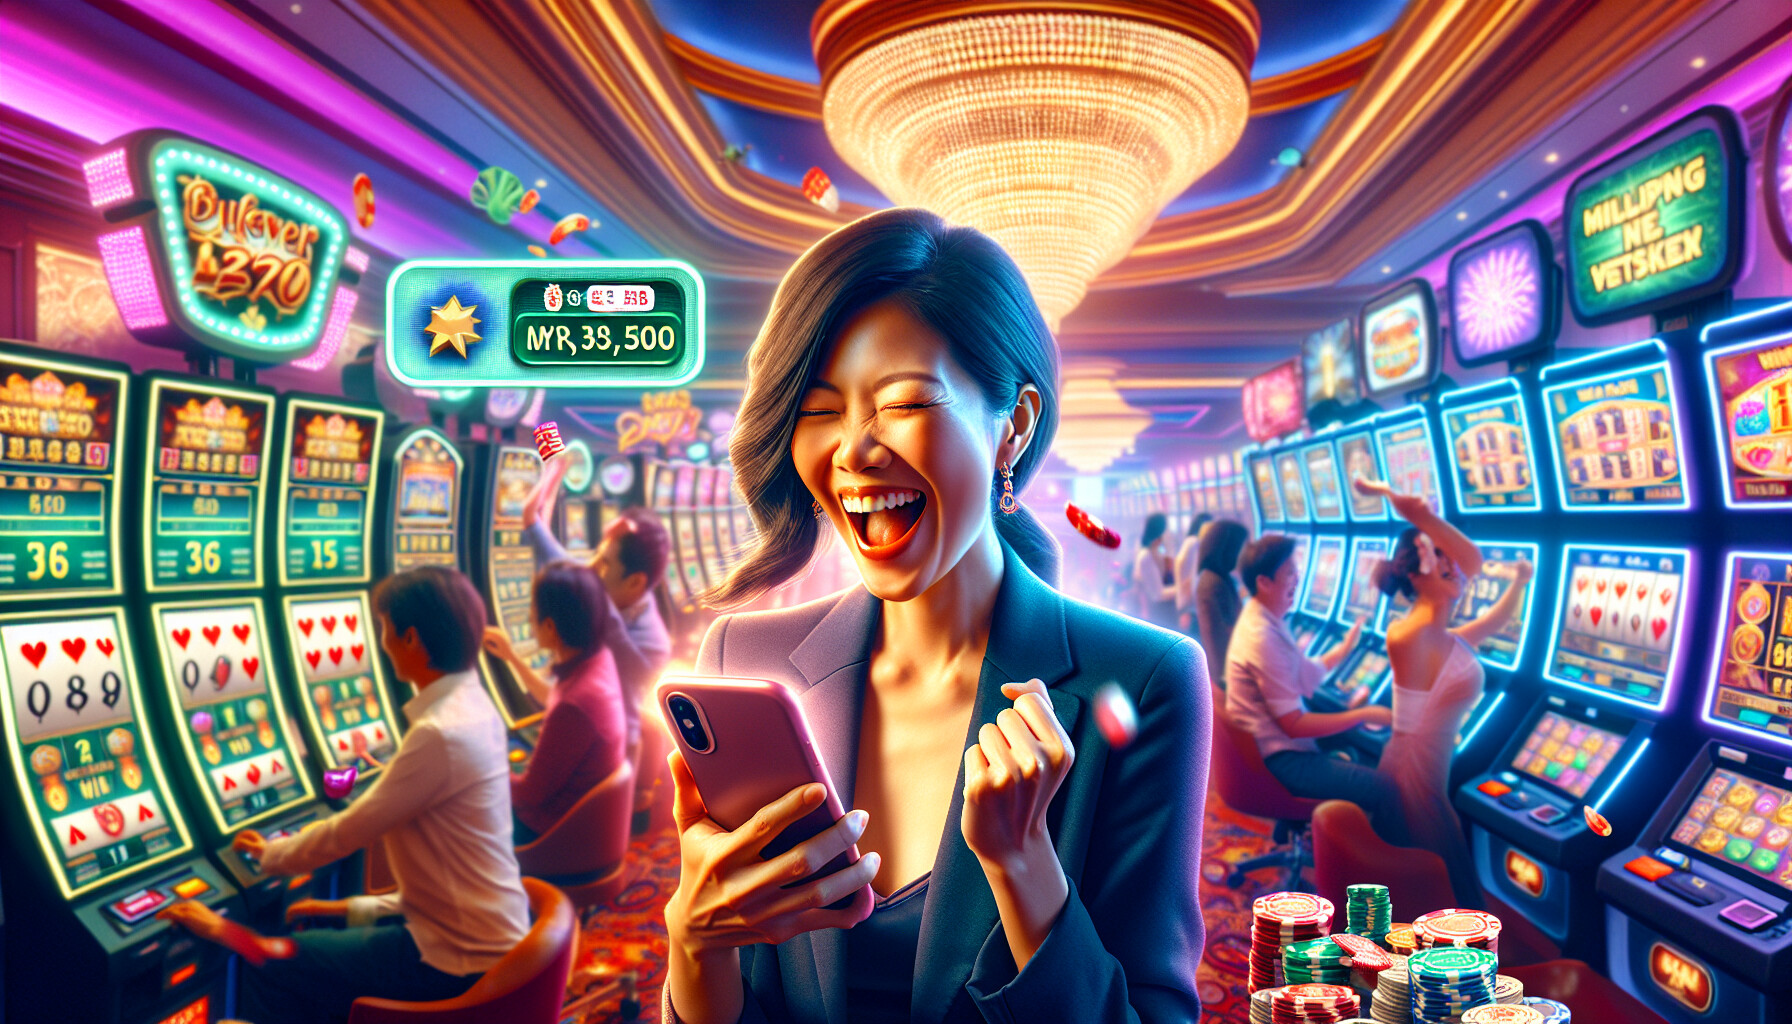  💰🎰 Triple your luck! Transform MYR 50 into MYR 1,500 on Pussy888! Your jackpot journey begins here!🚀🎲 